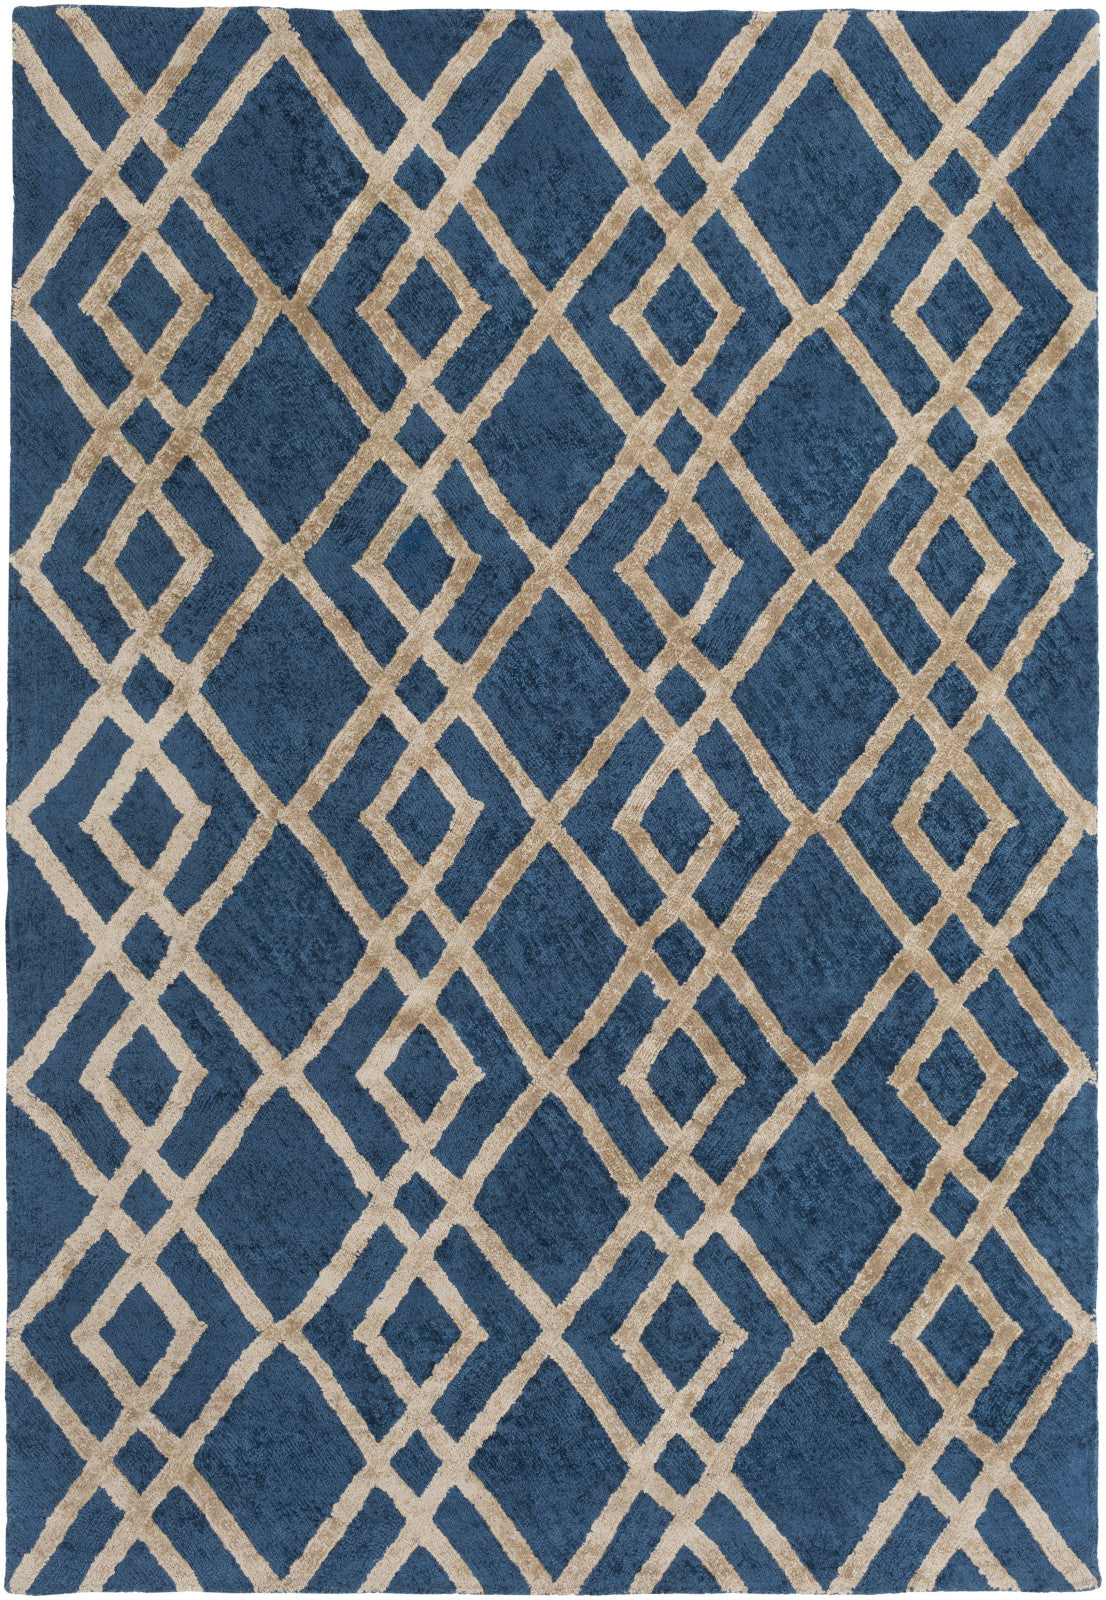 Artistic Weavers Silk Valley Lila Turquoise/Taupe Area Rug main image